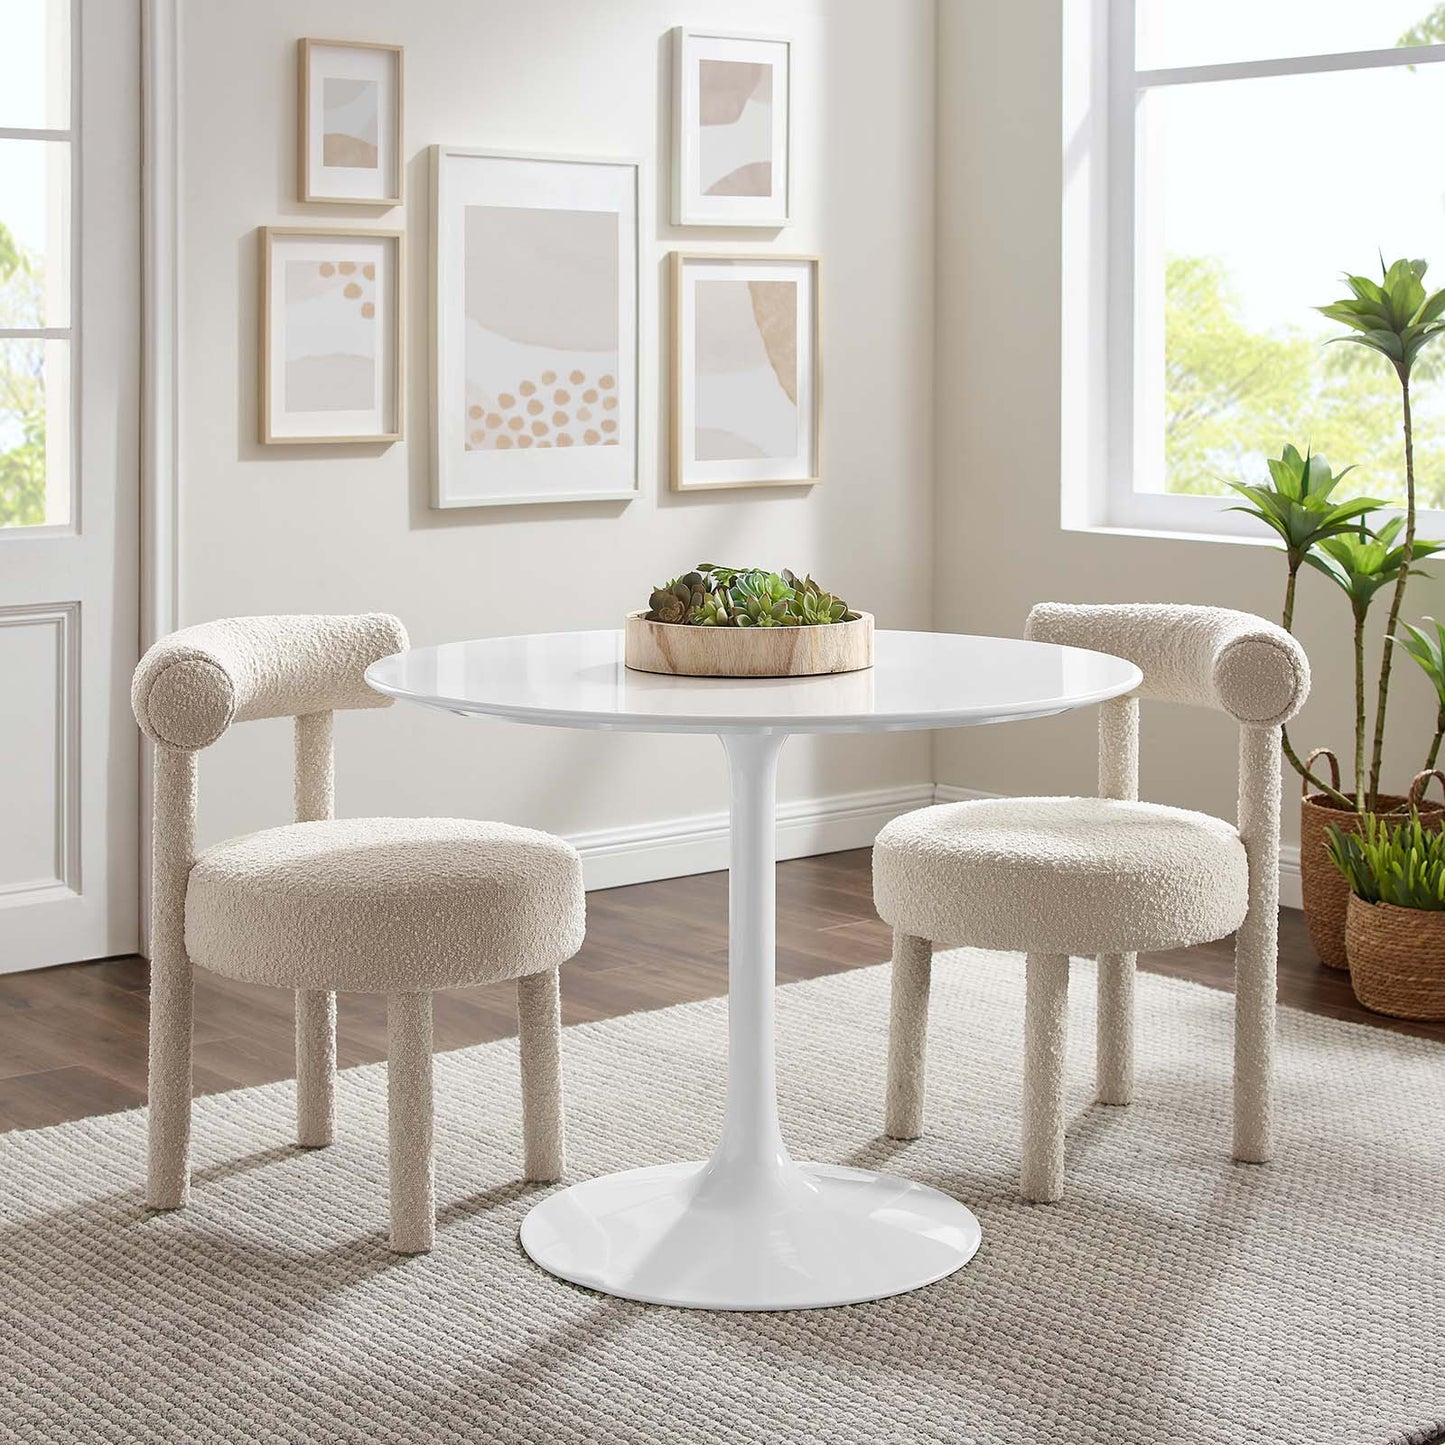 Modway Lippa 40" Round Wood Top Dining Table in White - EEI-1117